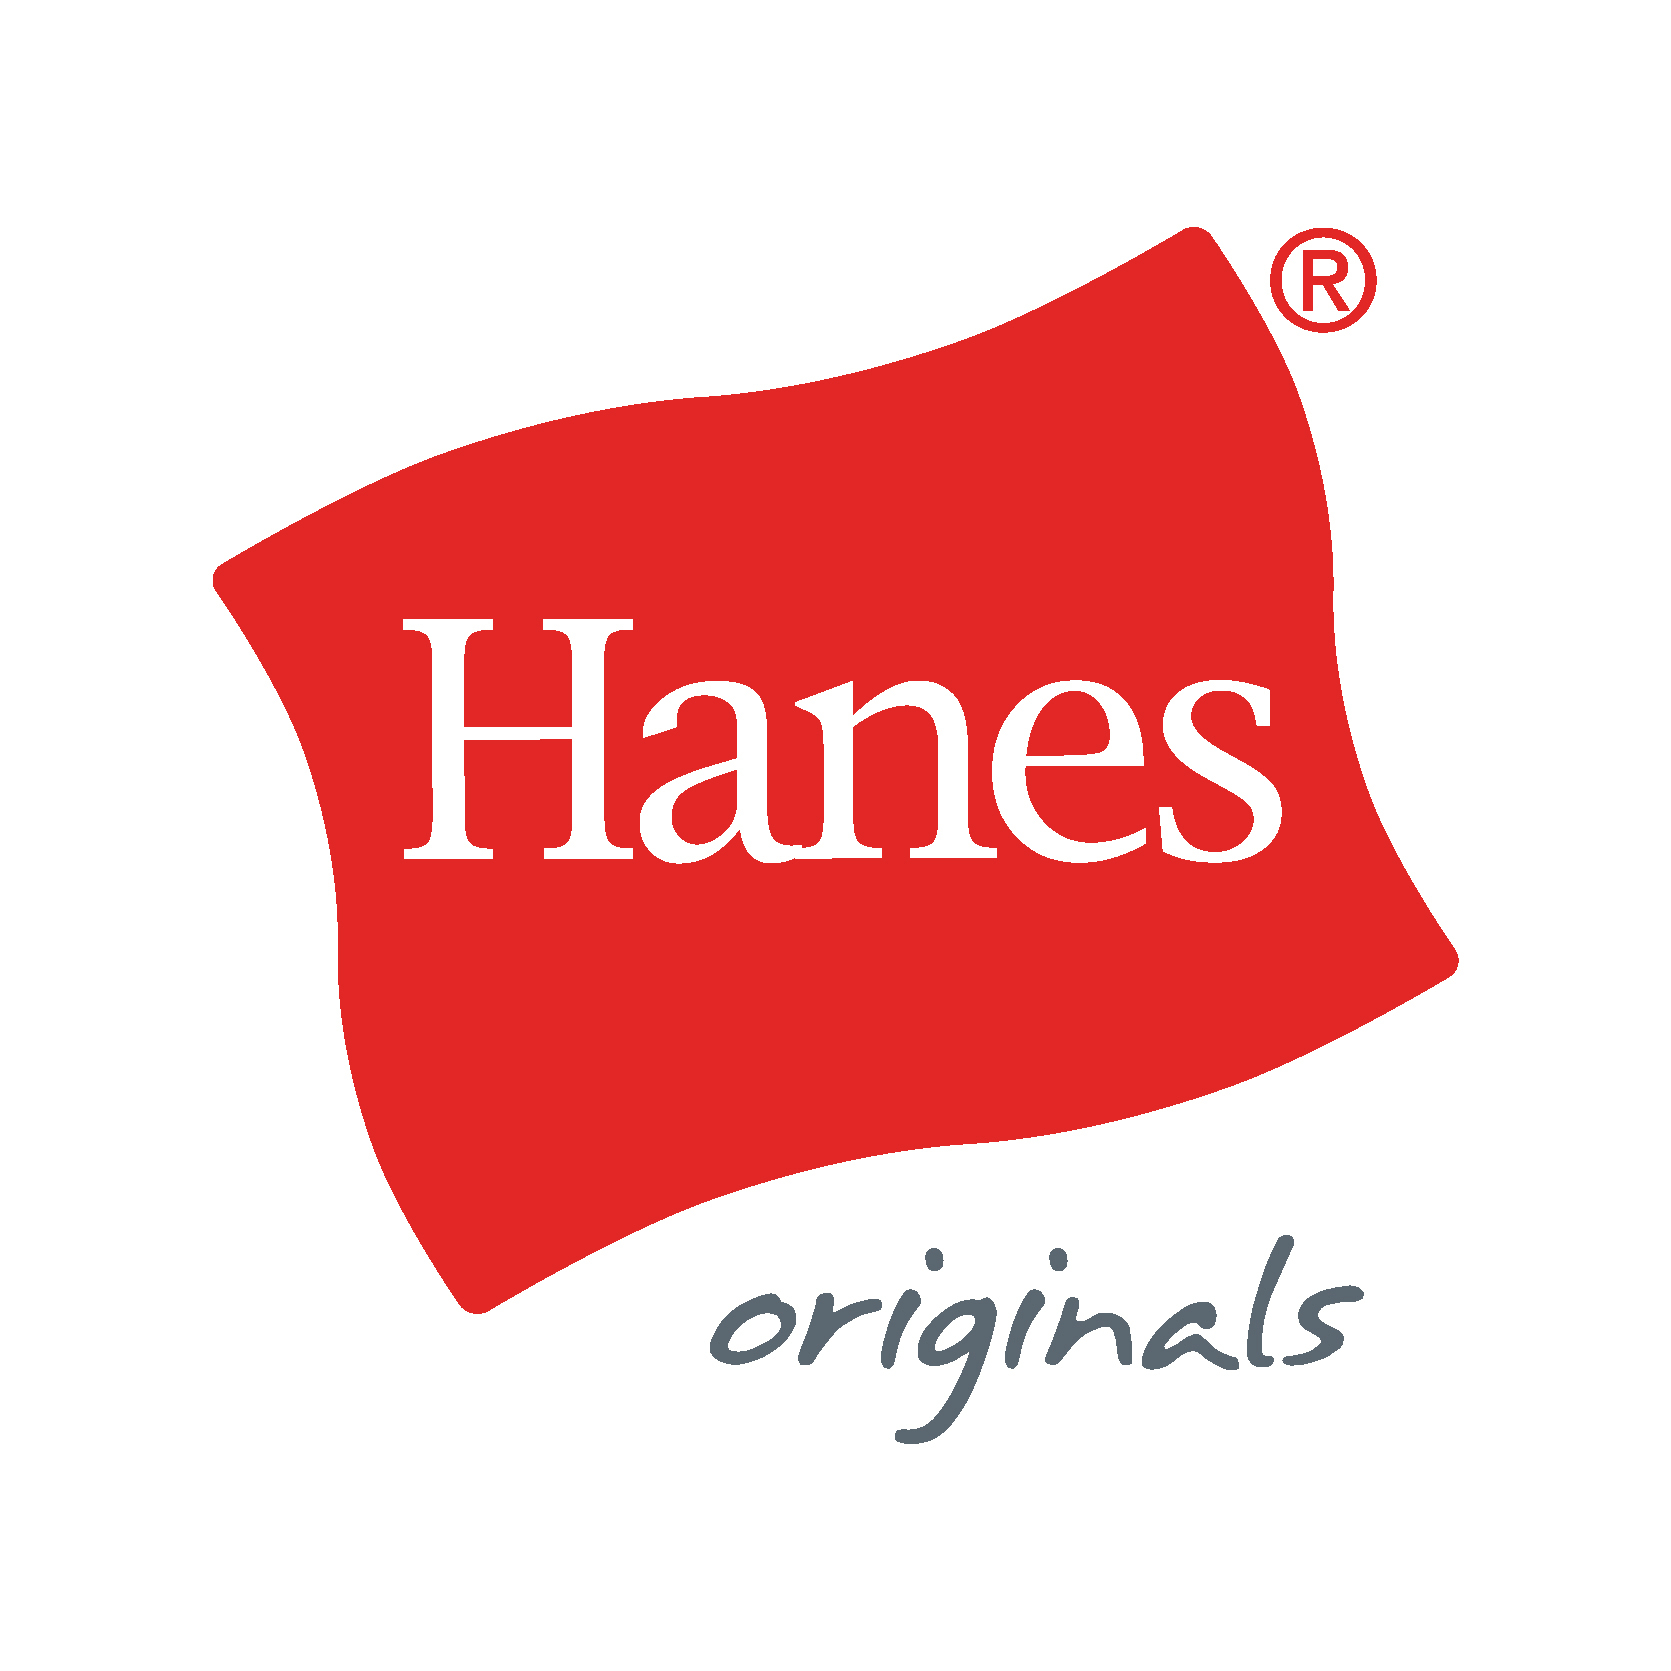 Hanes Reignites With Stylish and Comfortable New Hanes Originals Collection